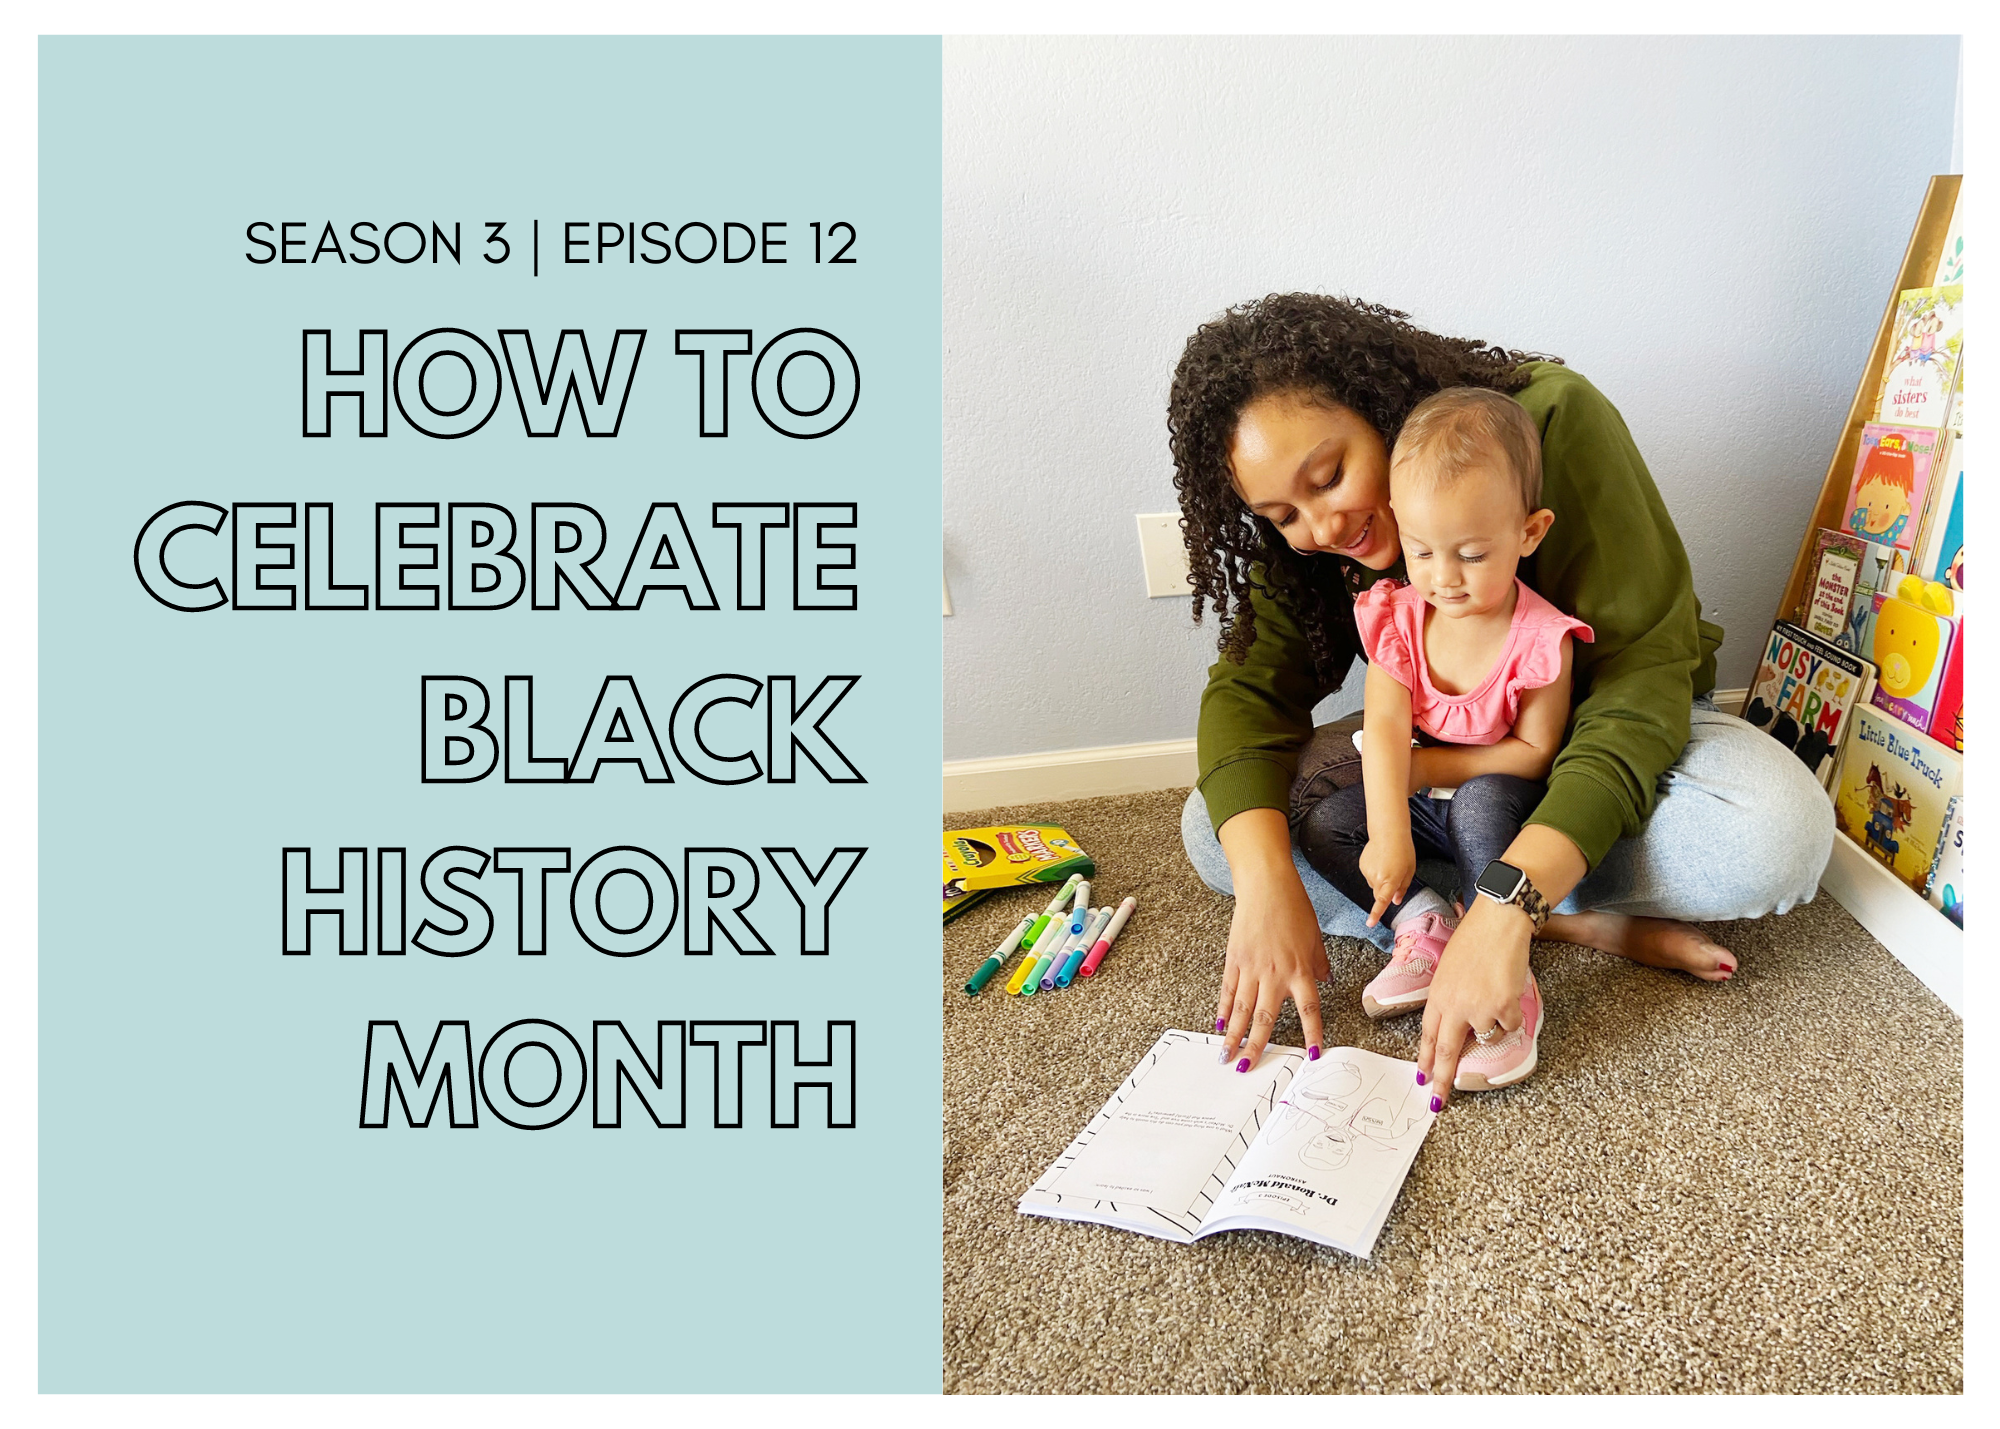 How to Celebrate Black History Month